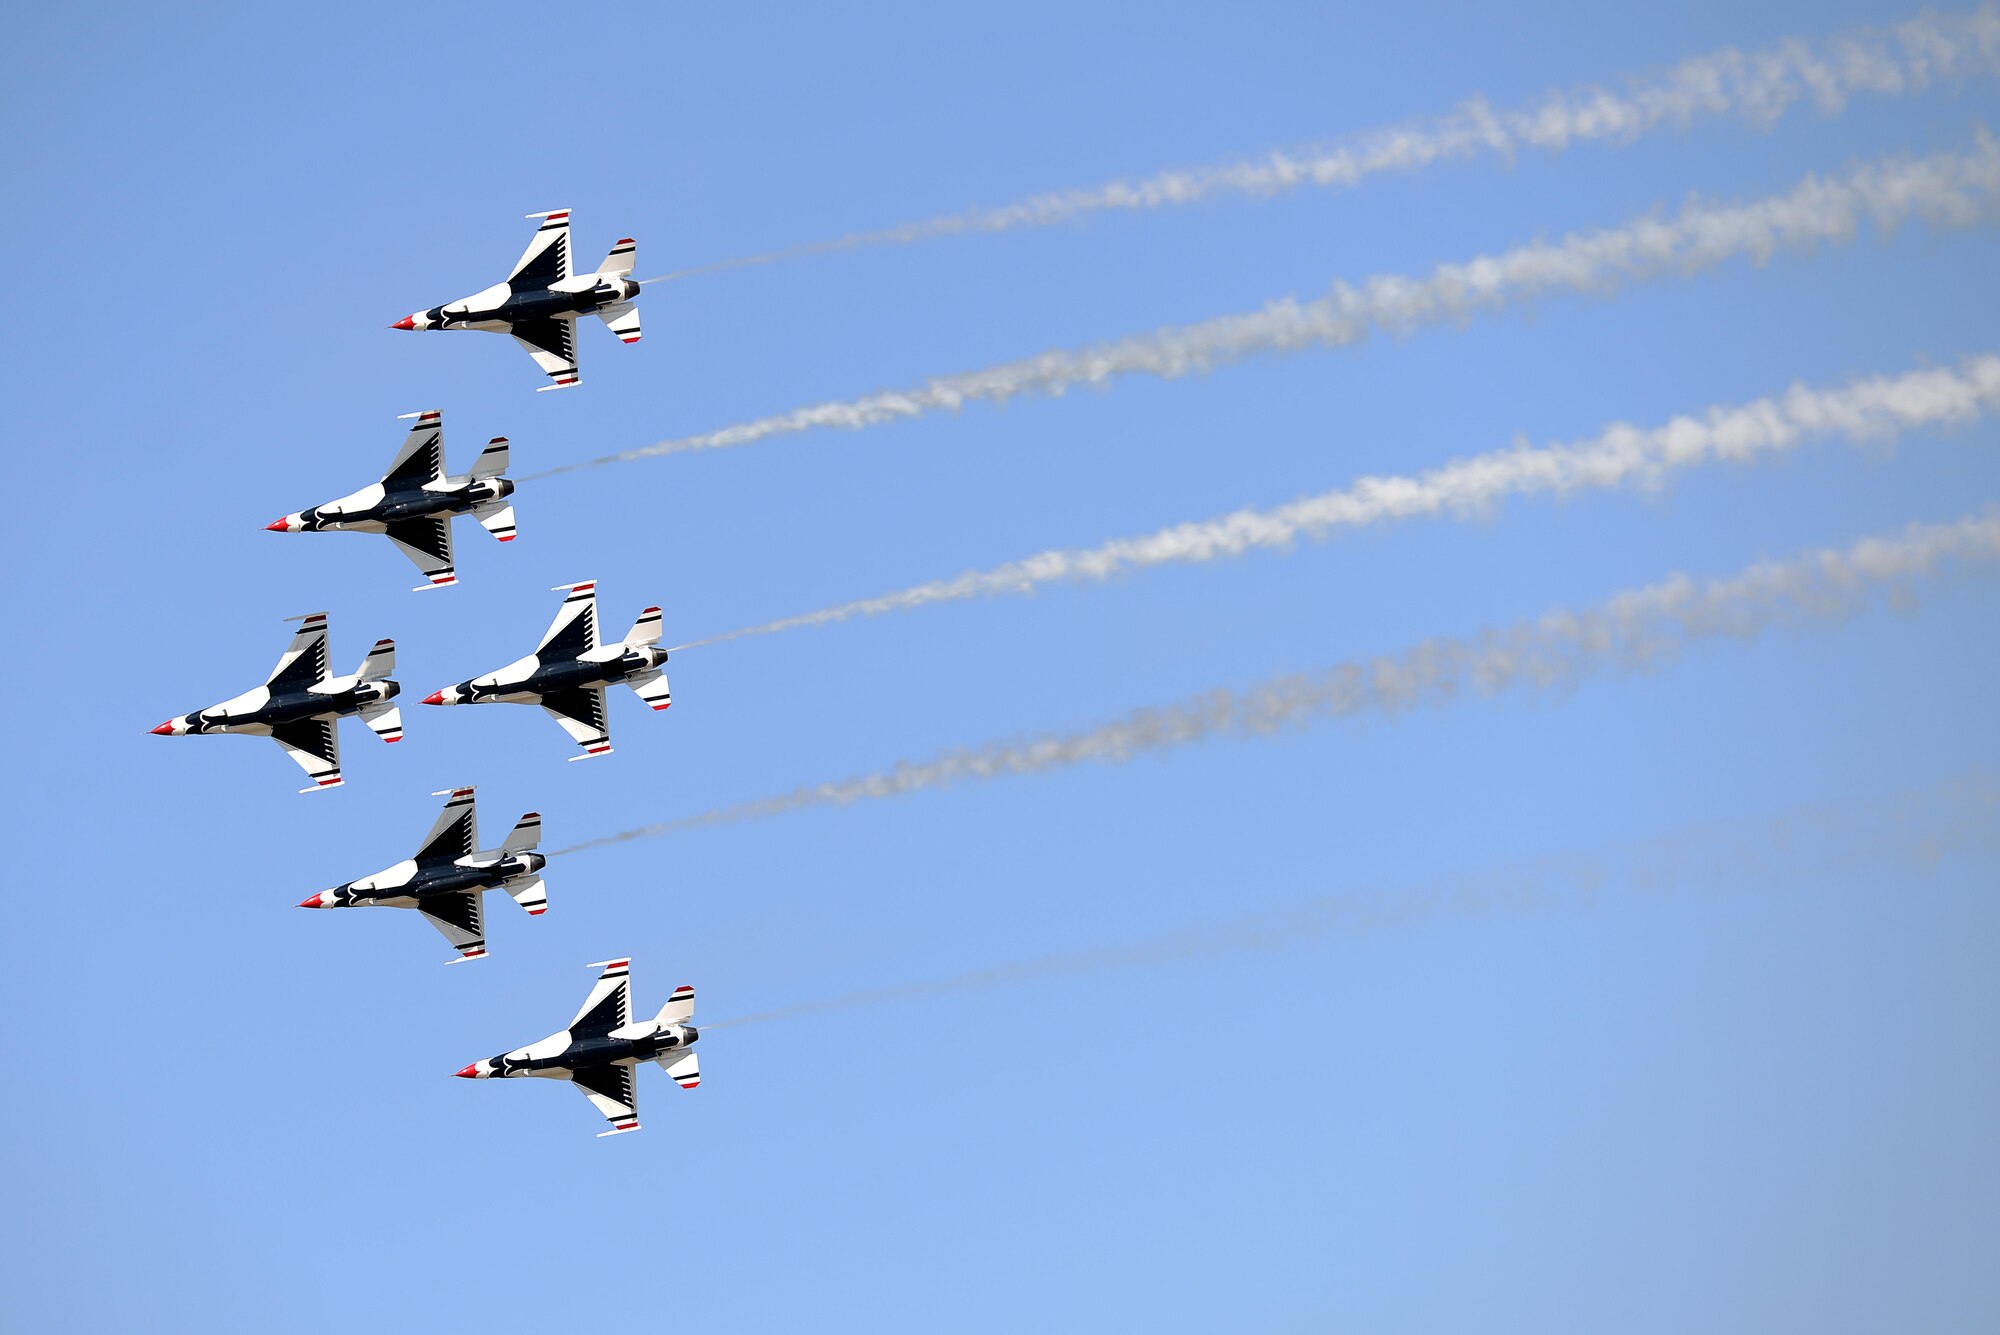 All six U.S. Air Force Thunderbirds fly in a close air formation during the Sheppard Air Force Base, Texas, 75th Anniversary Air Show Celebration, Sept. 17, 2016. The Thunderbirds showcase the skill and precision of the brave aviators, maintenance and support Airmen who deploy abroad to defend our nation and its allies. (U.S. Air Force photo by Senior Airman Kyle E. Gese)